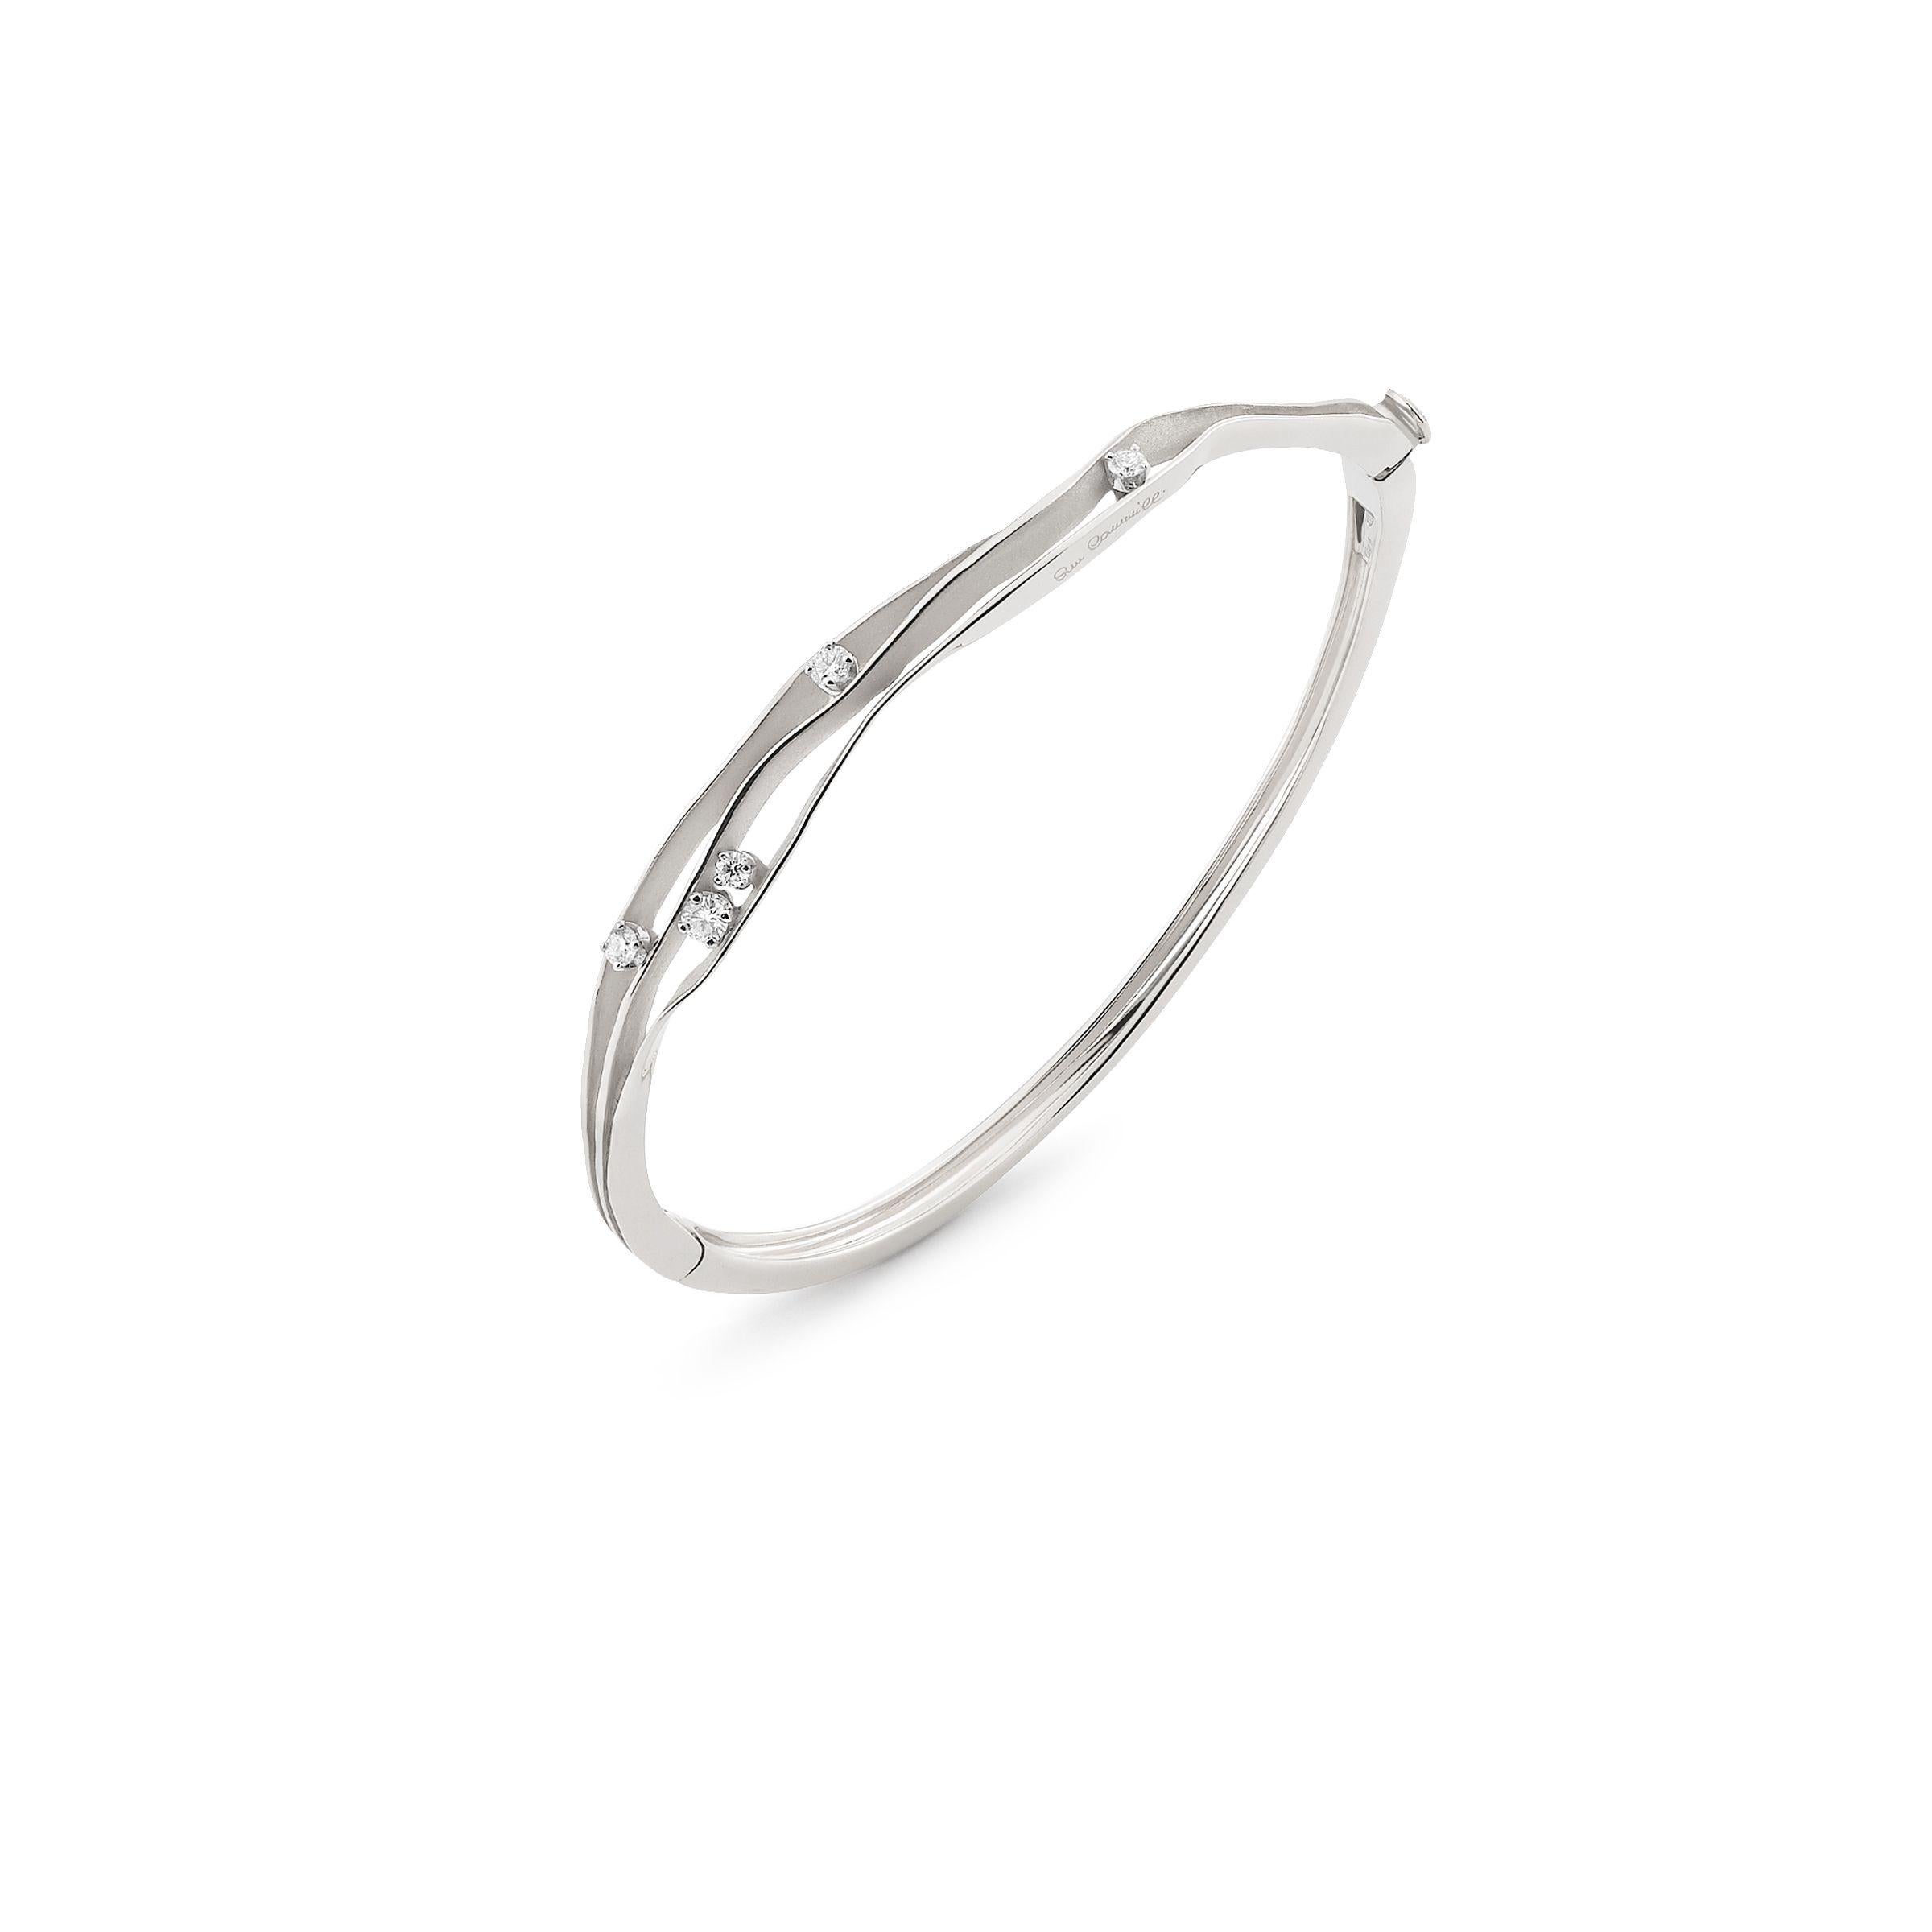 From Annamaria Cammilli's Essential collection, Dune bracelet handcrafted in 18 karat Ice White gold. Five brilliant white diamonds at 0.31 carat total weight are prong set and nested in four curving layers of satin and polished gold. 8 mm wide at